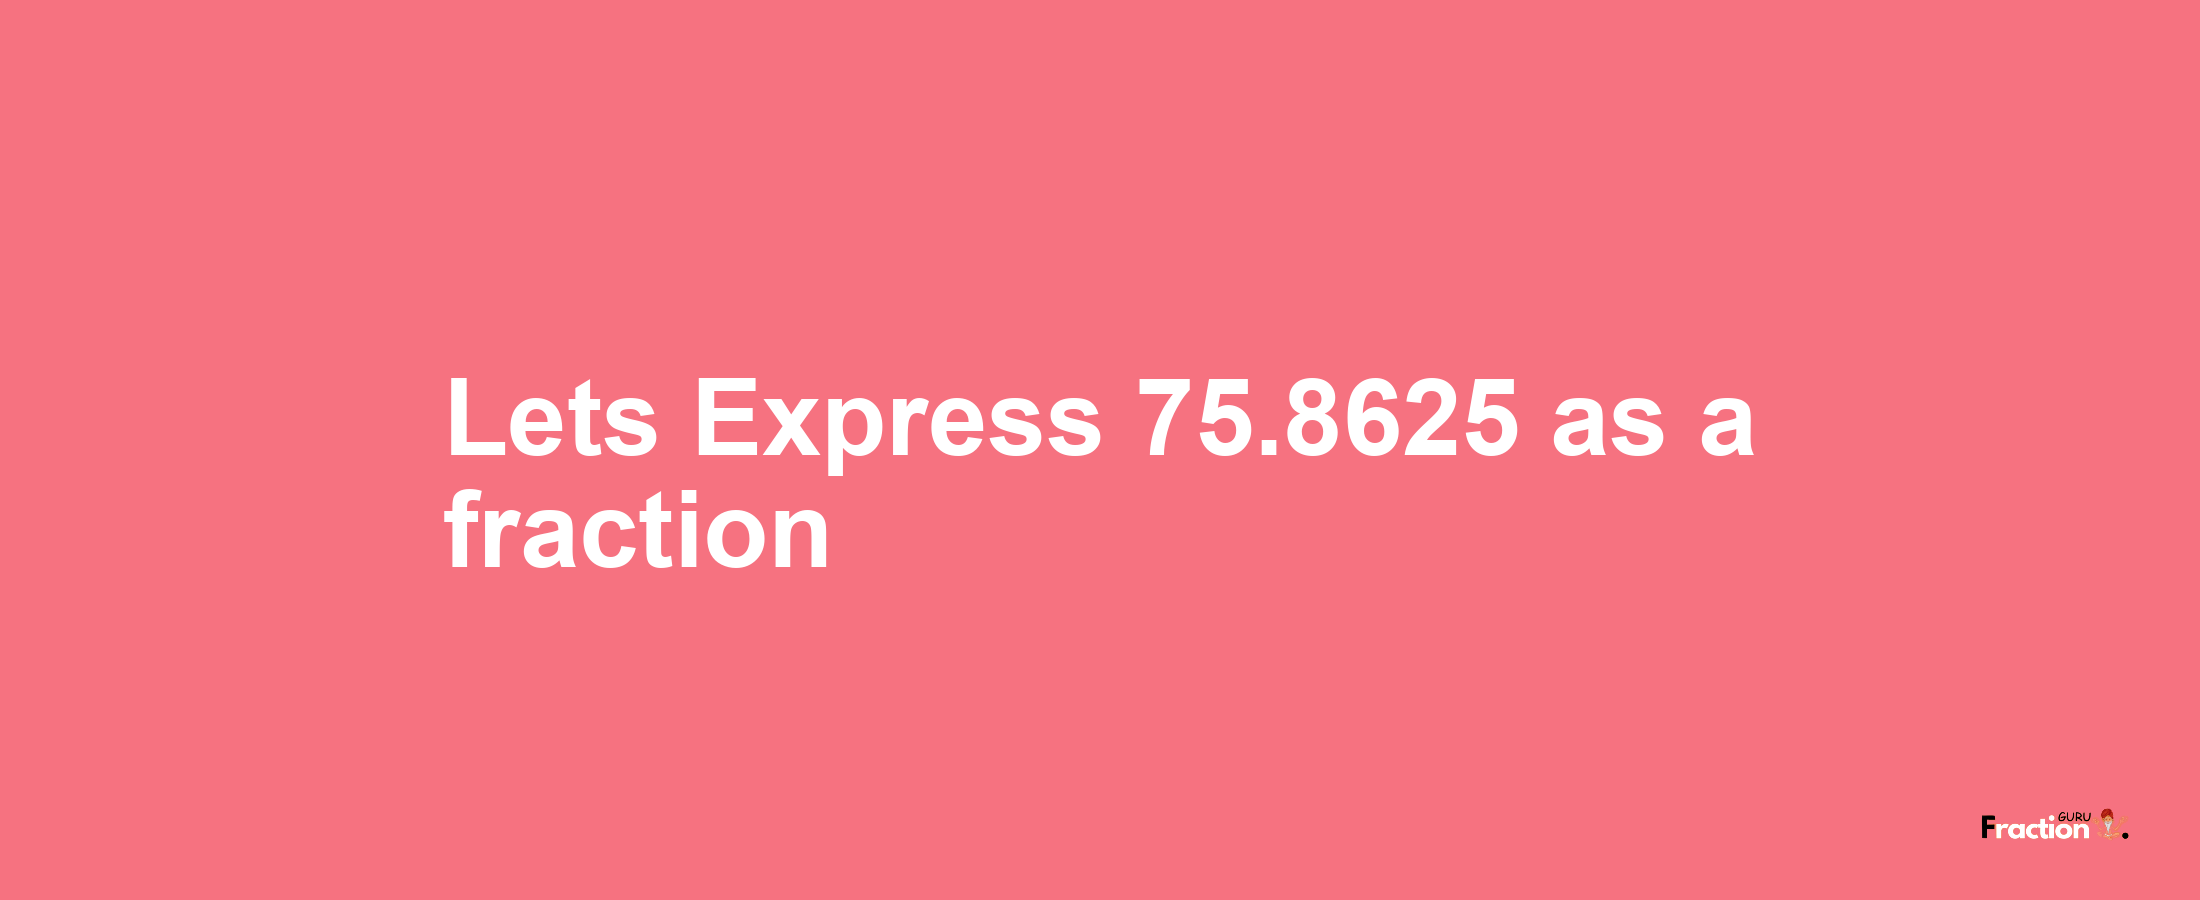 Lets Express 75.8625 as afraction